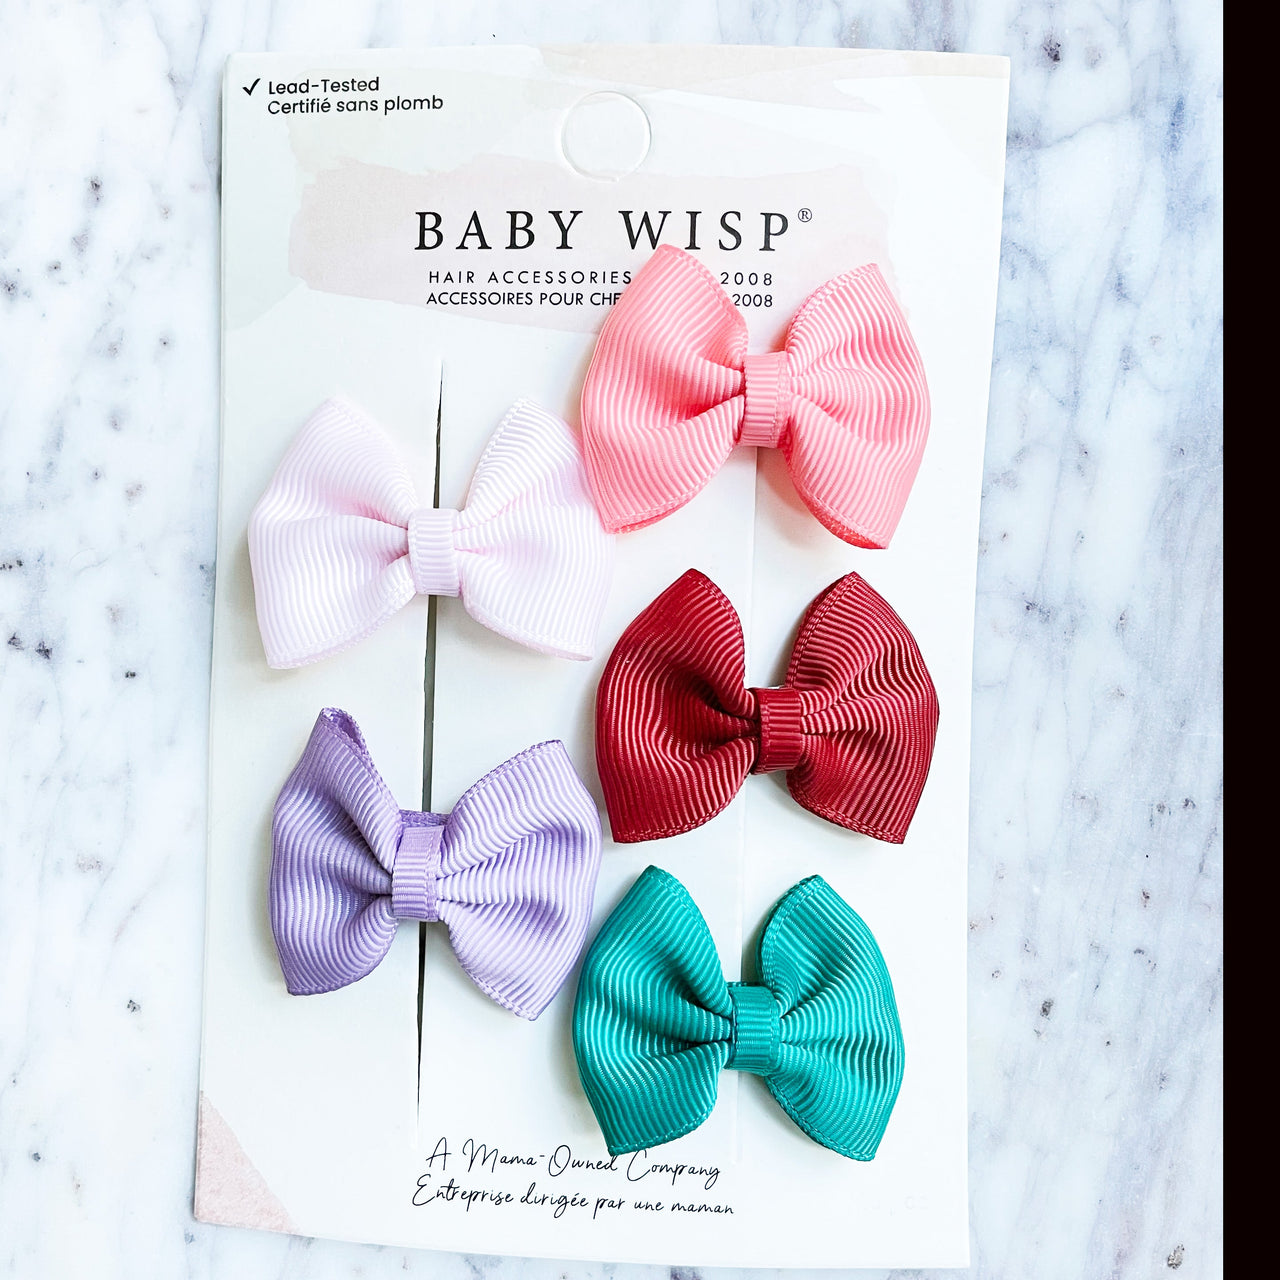 5 Classic Fan Out Bows - Small Snap Clip Gift Set Baby Wisp